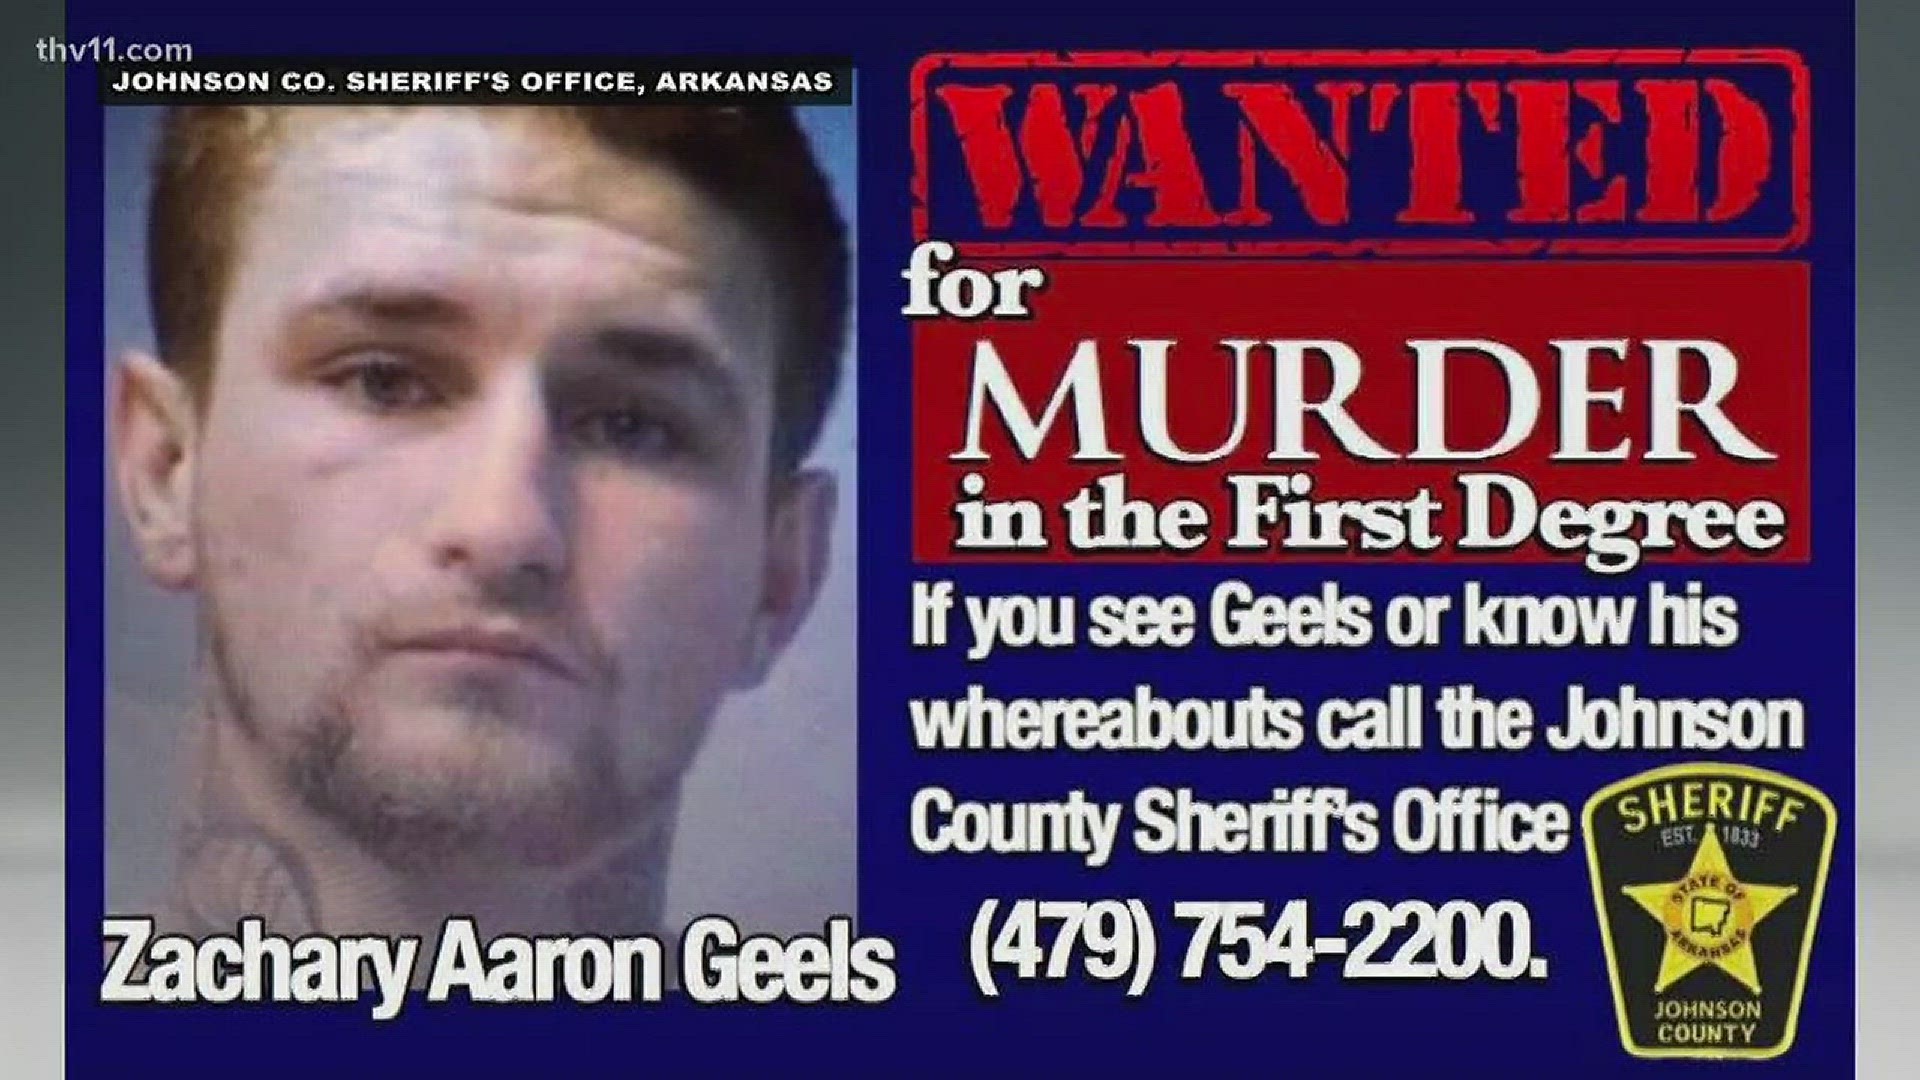 Zachary Aaron Geels is wanted in connection with the death of Vernice "Duwane" Ledbetter. Geels is considered armed and dangerous.